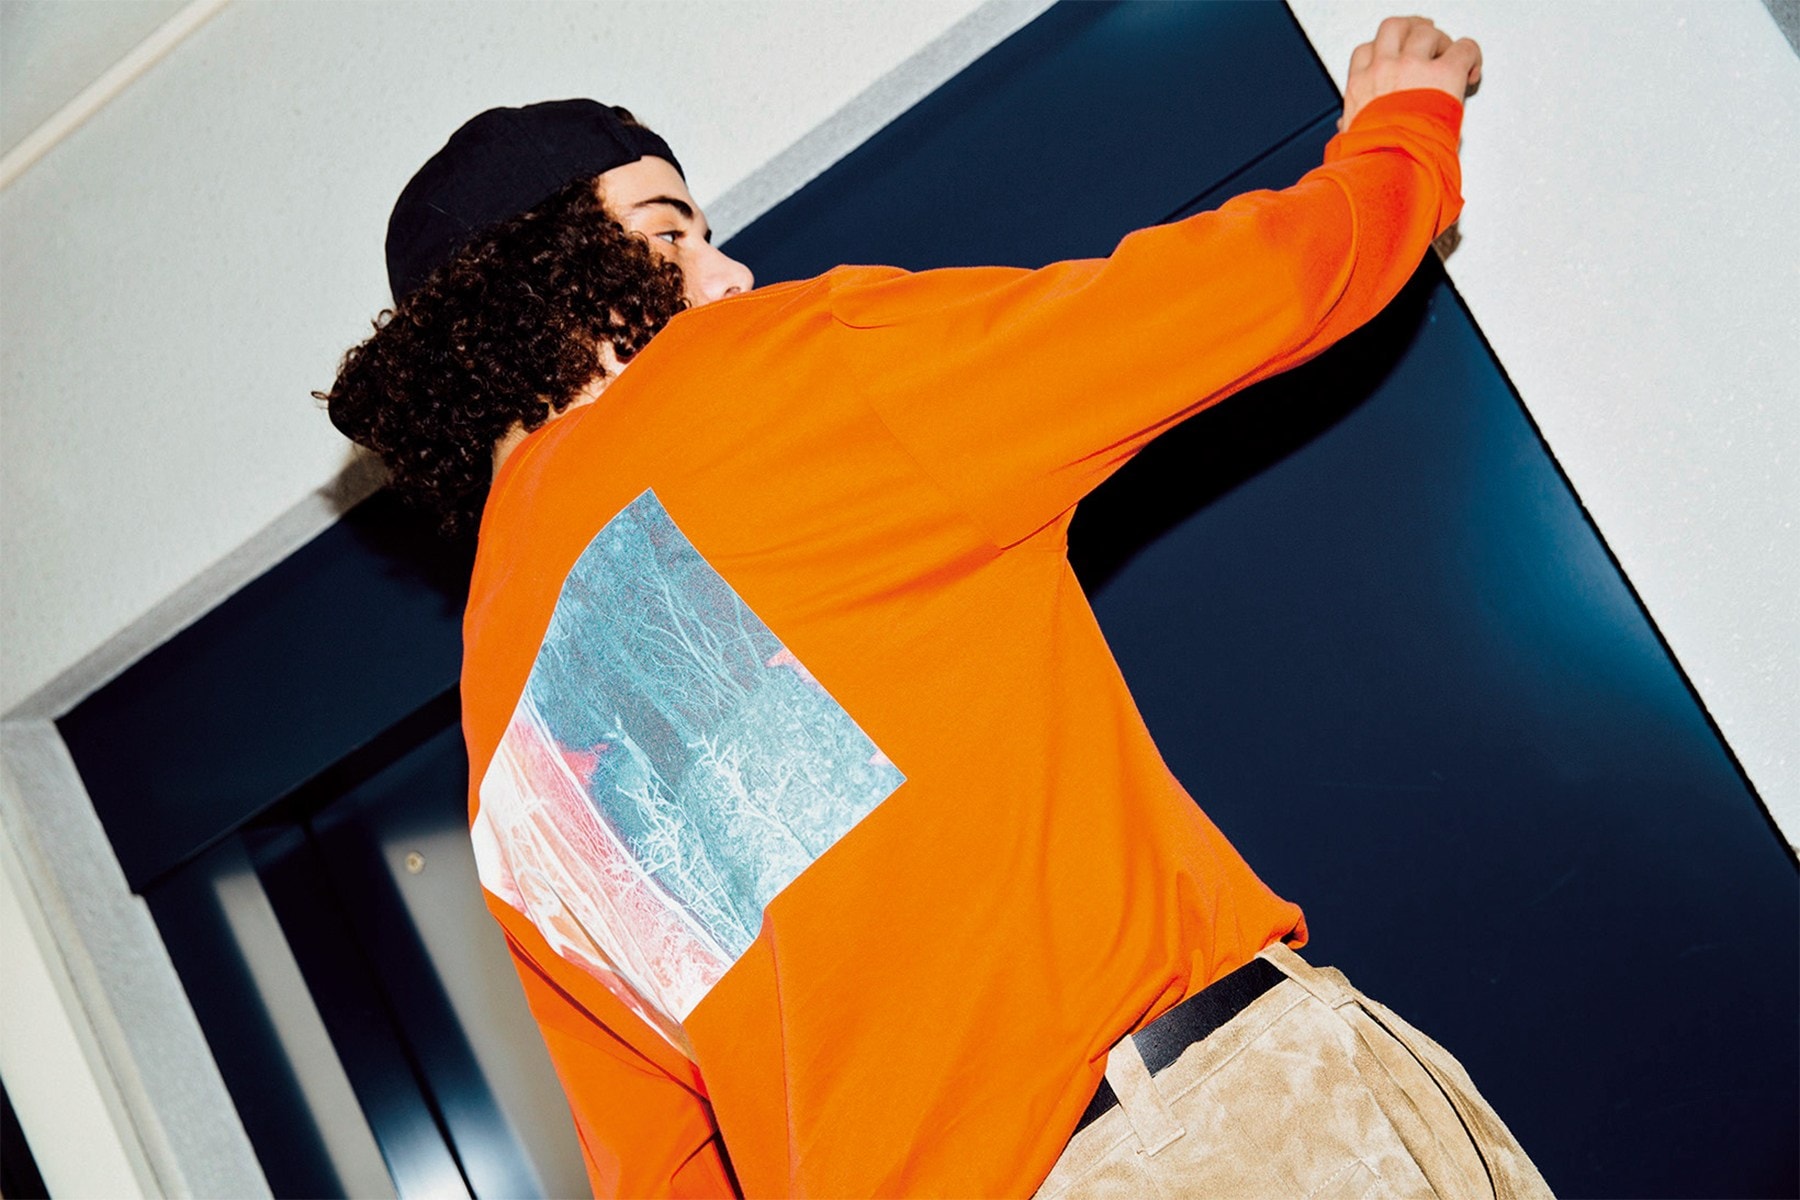 SHIPS JET BLUE Highlights Graphic Prints and Bold Colors for 2017 Spring/Summer Lookbooks Thrasher Fruit of the Loom Vans